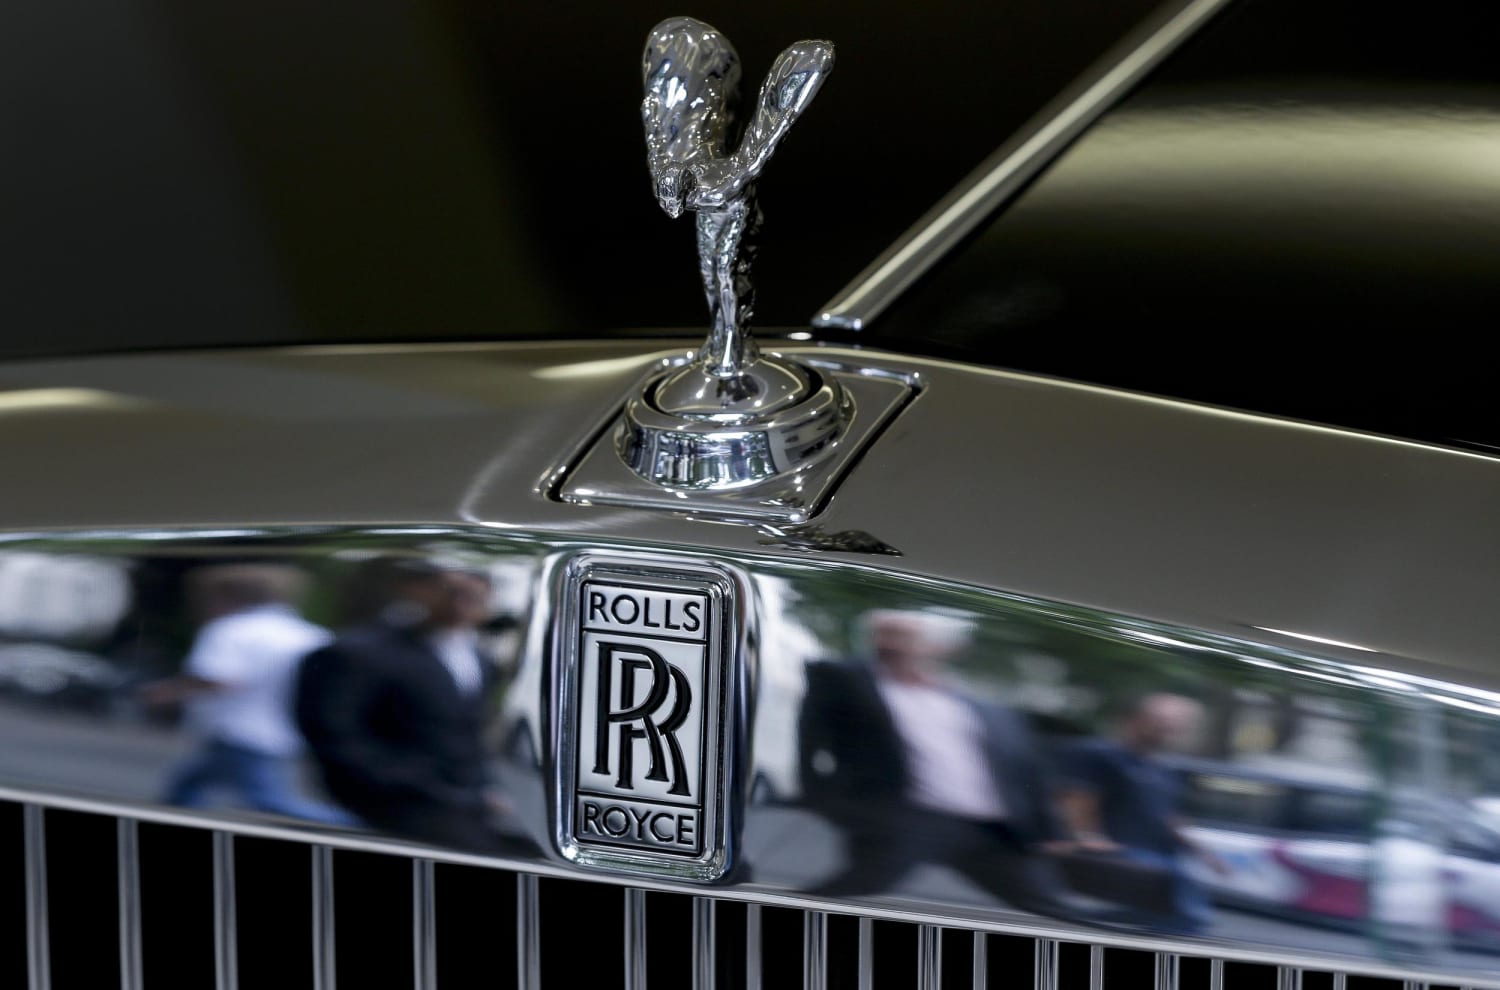 Rolls Royce's $400,000 SUV helps carmaker set sales record in 2019